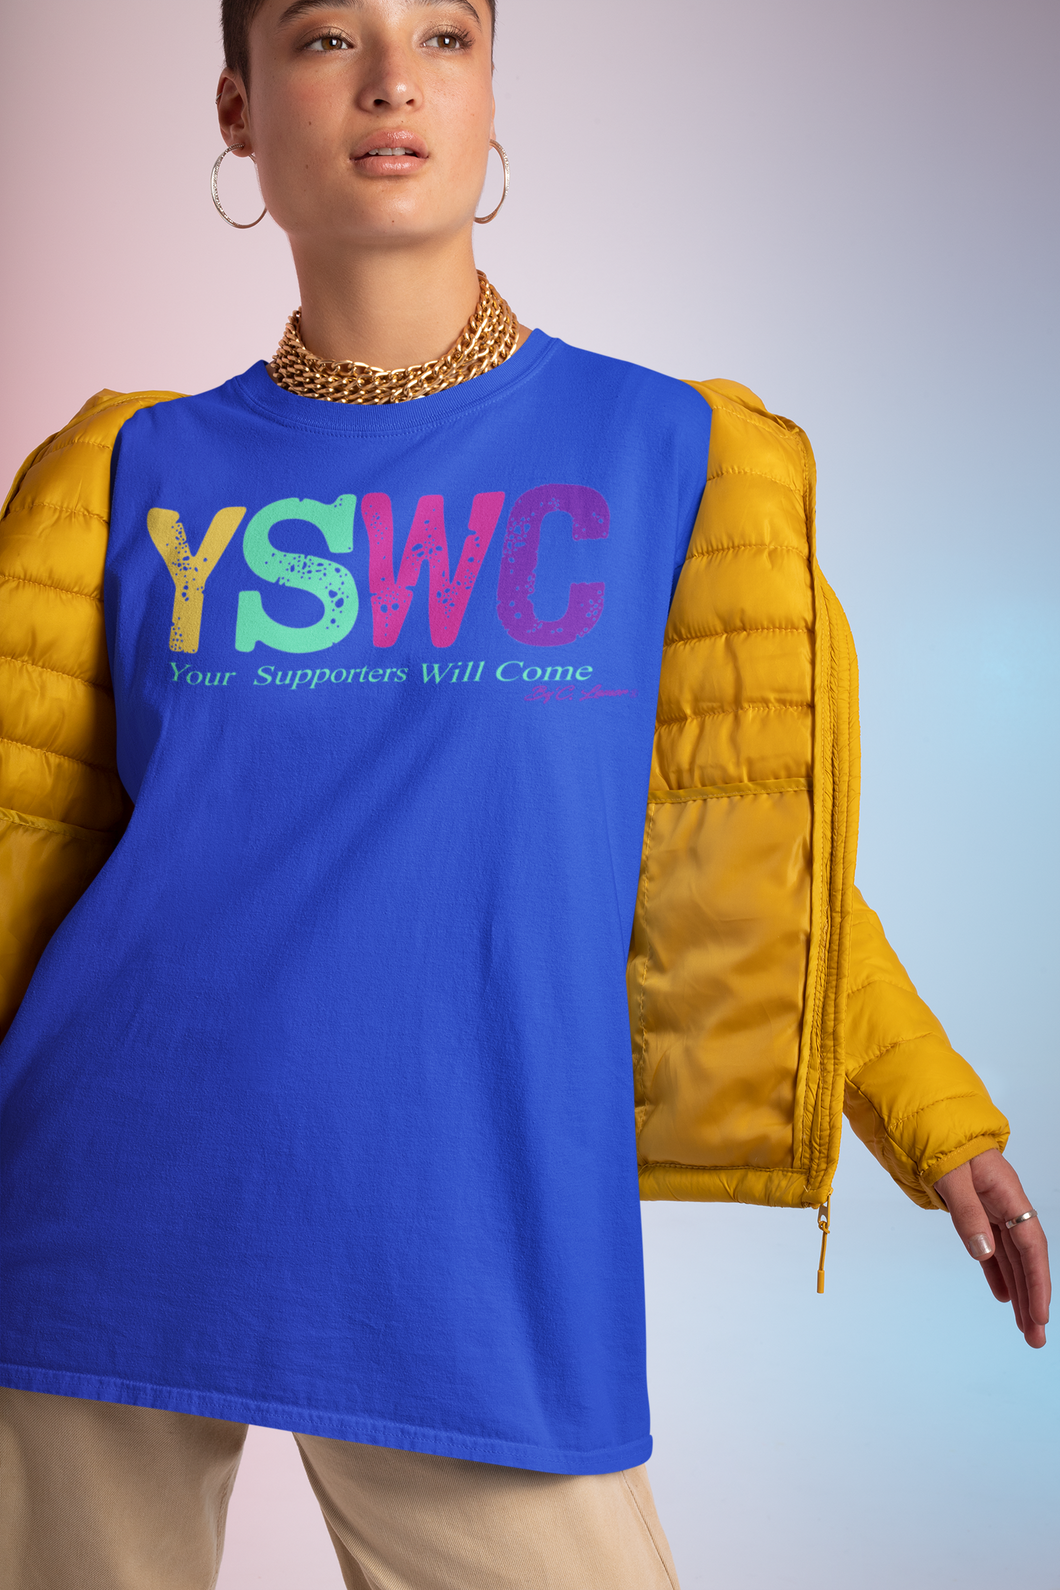 By' C. Lamor- YSWC Letter, Royal Blue tshirt, in the colors Yellow, Green, Pink and Purple for the Ladies